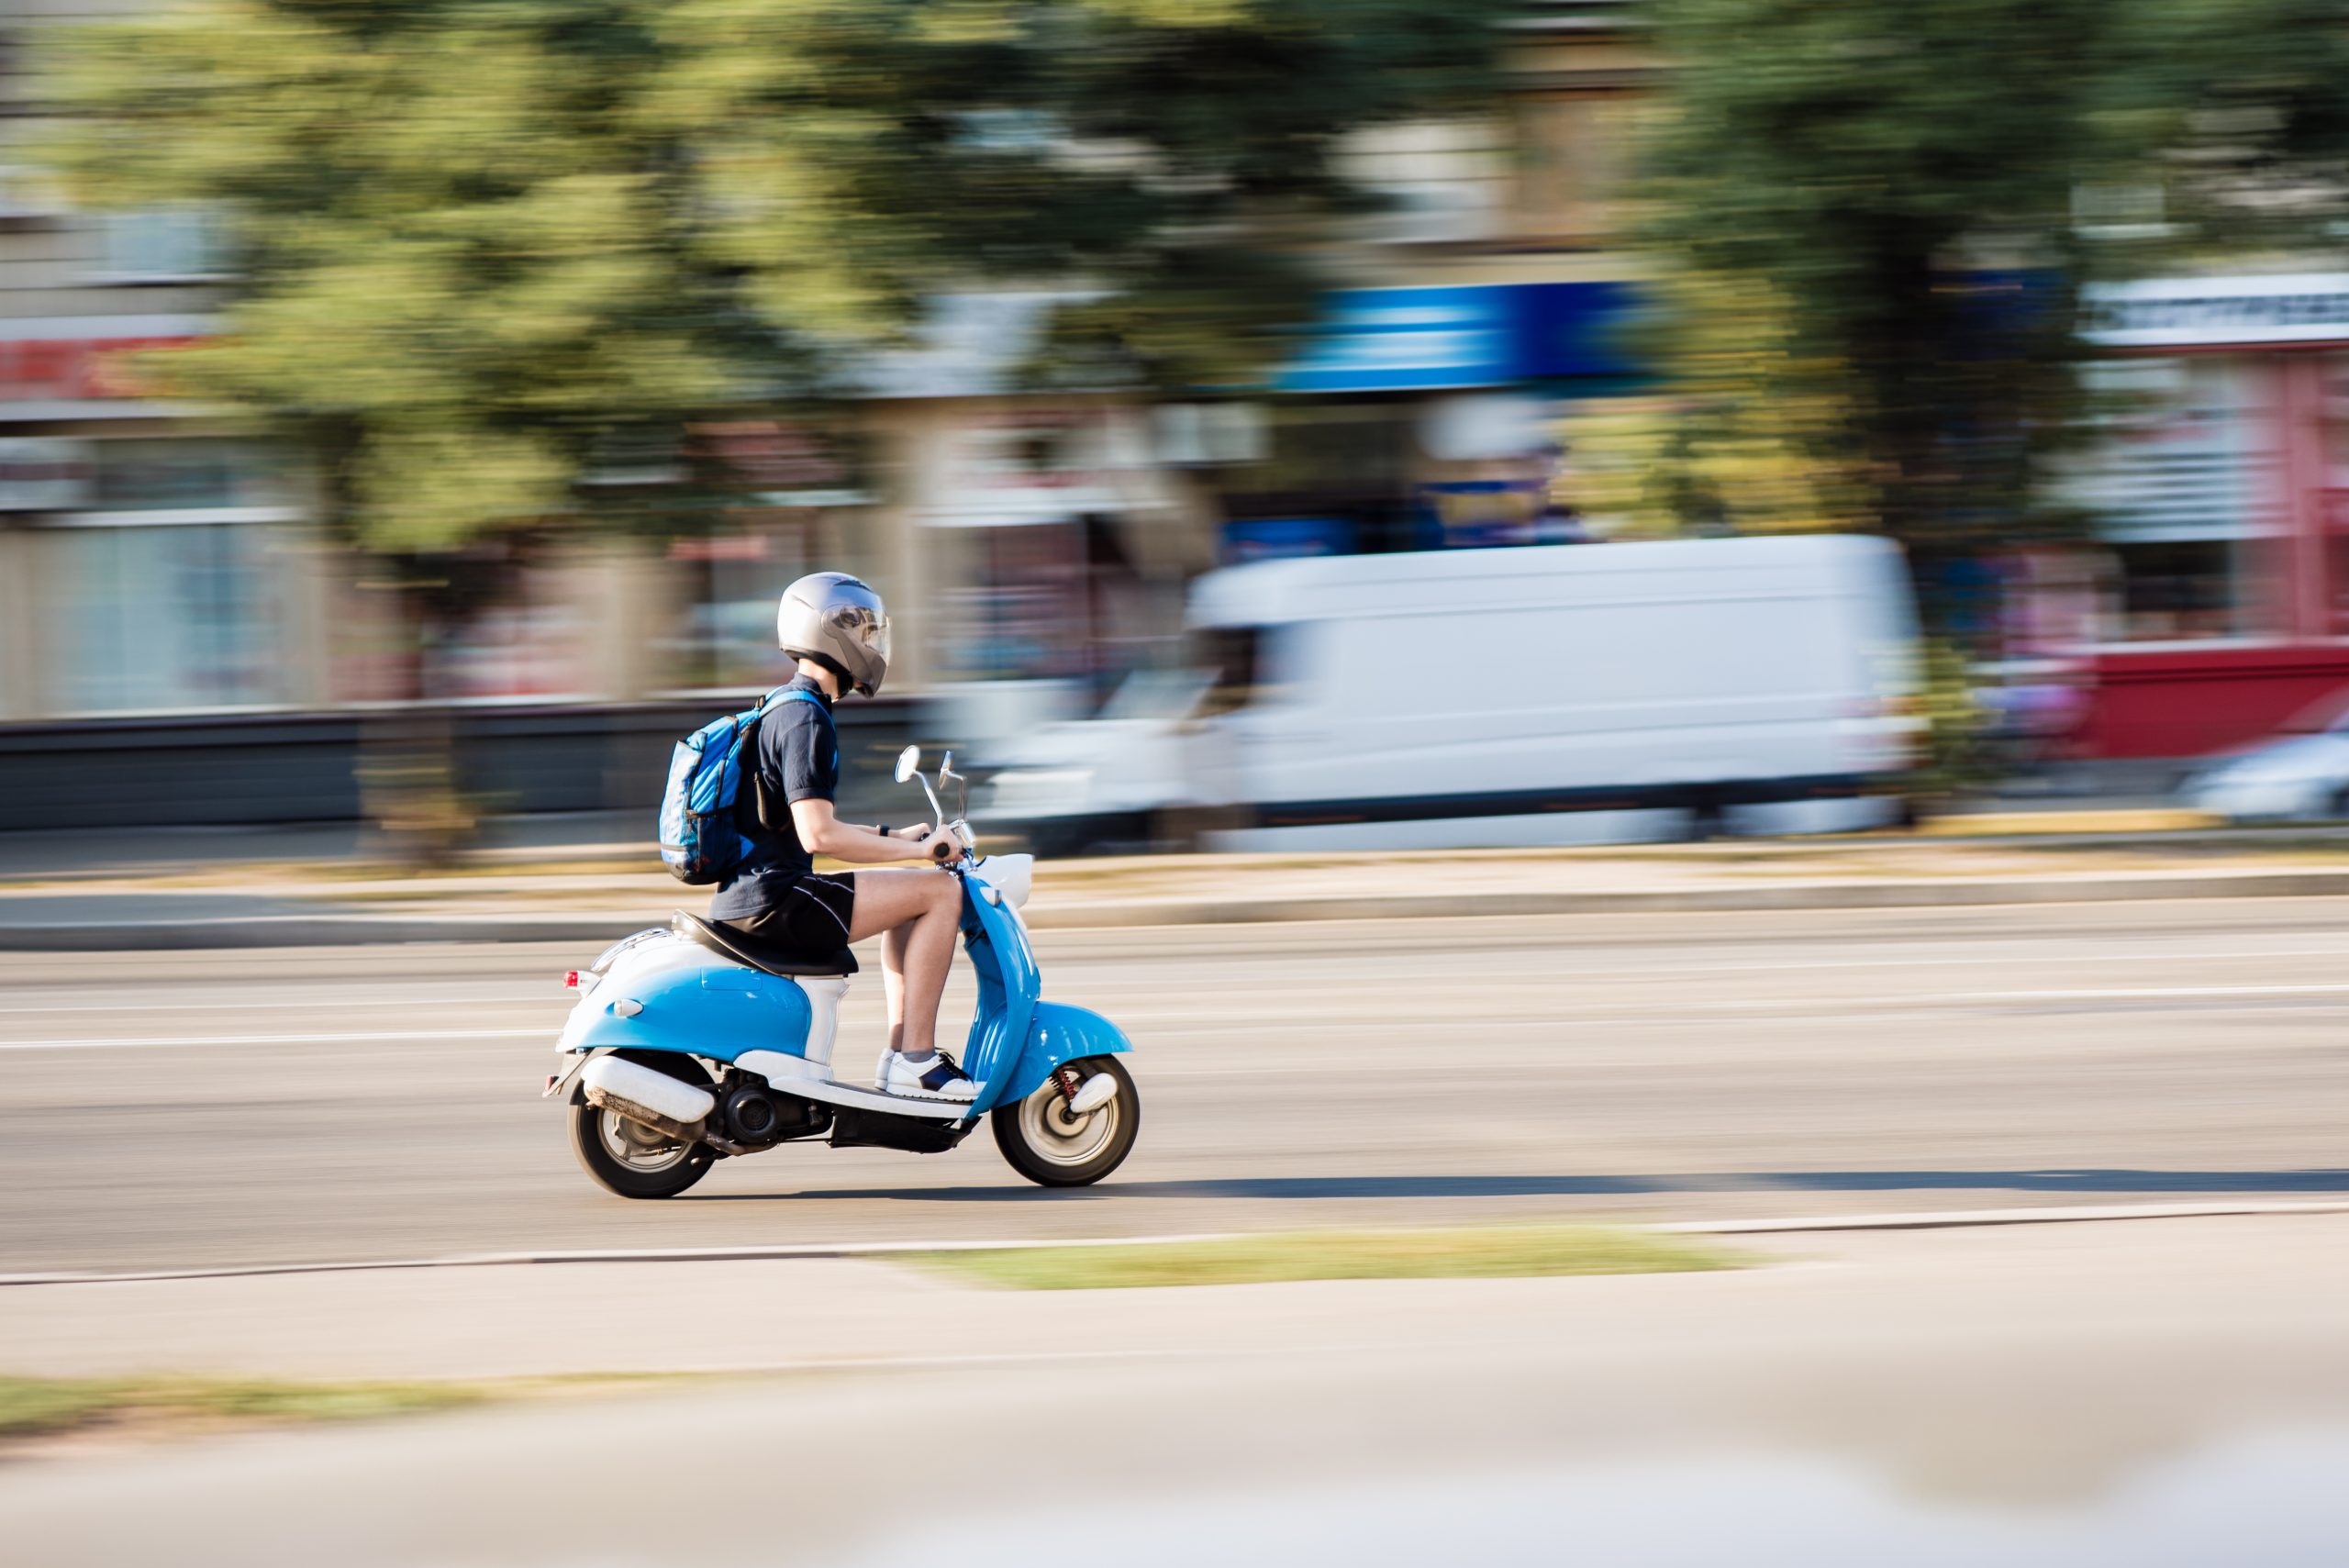 Motion Blurred moped moving past the camera